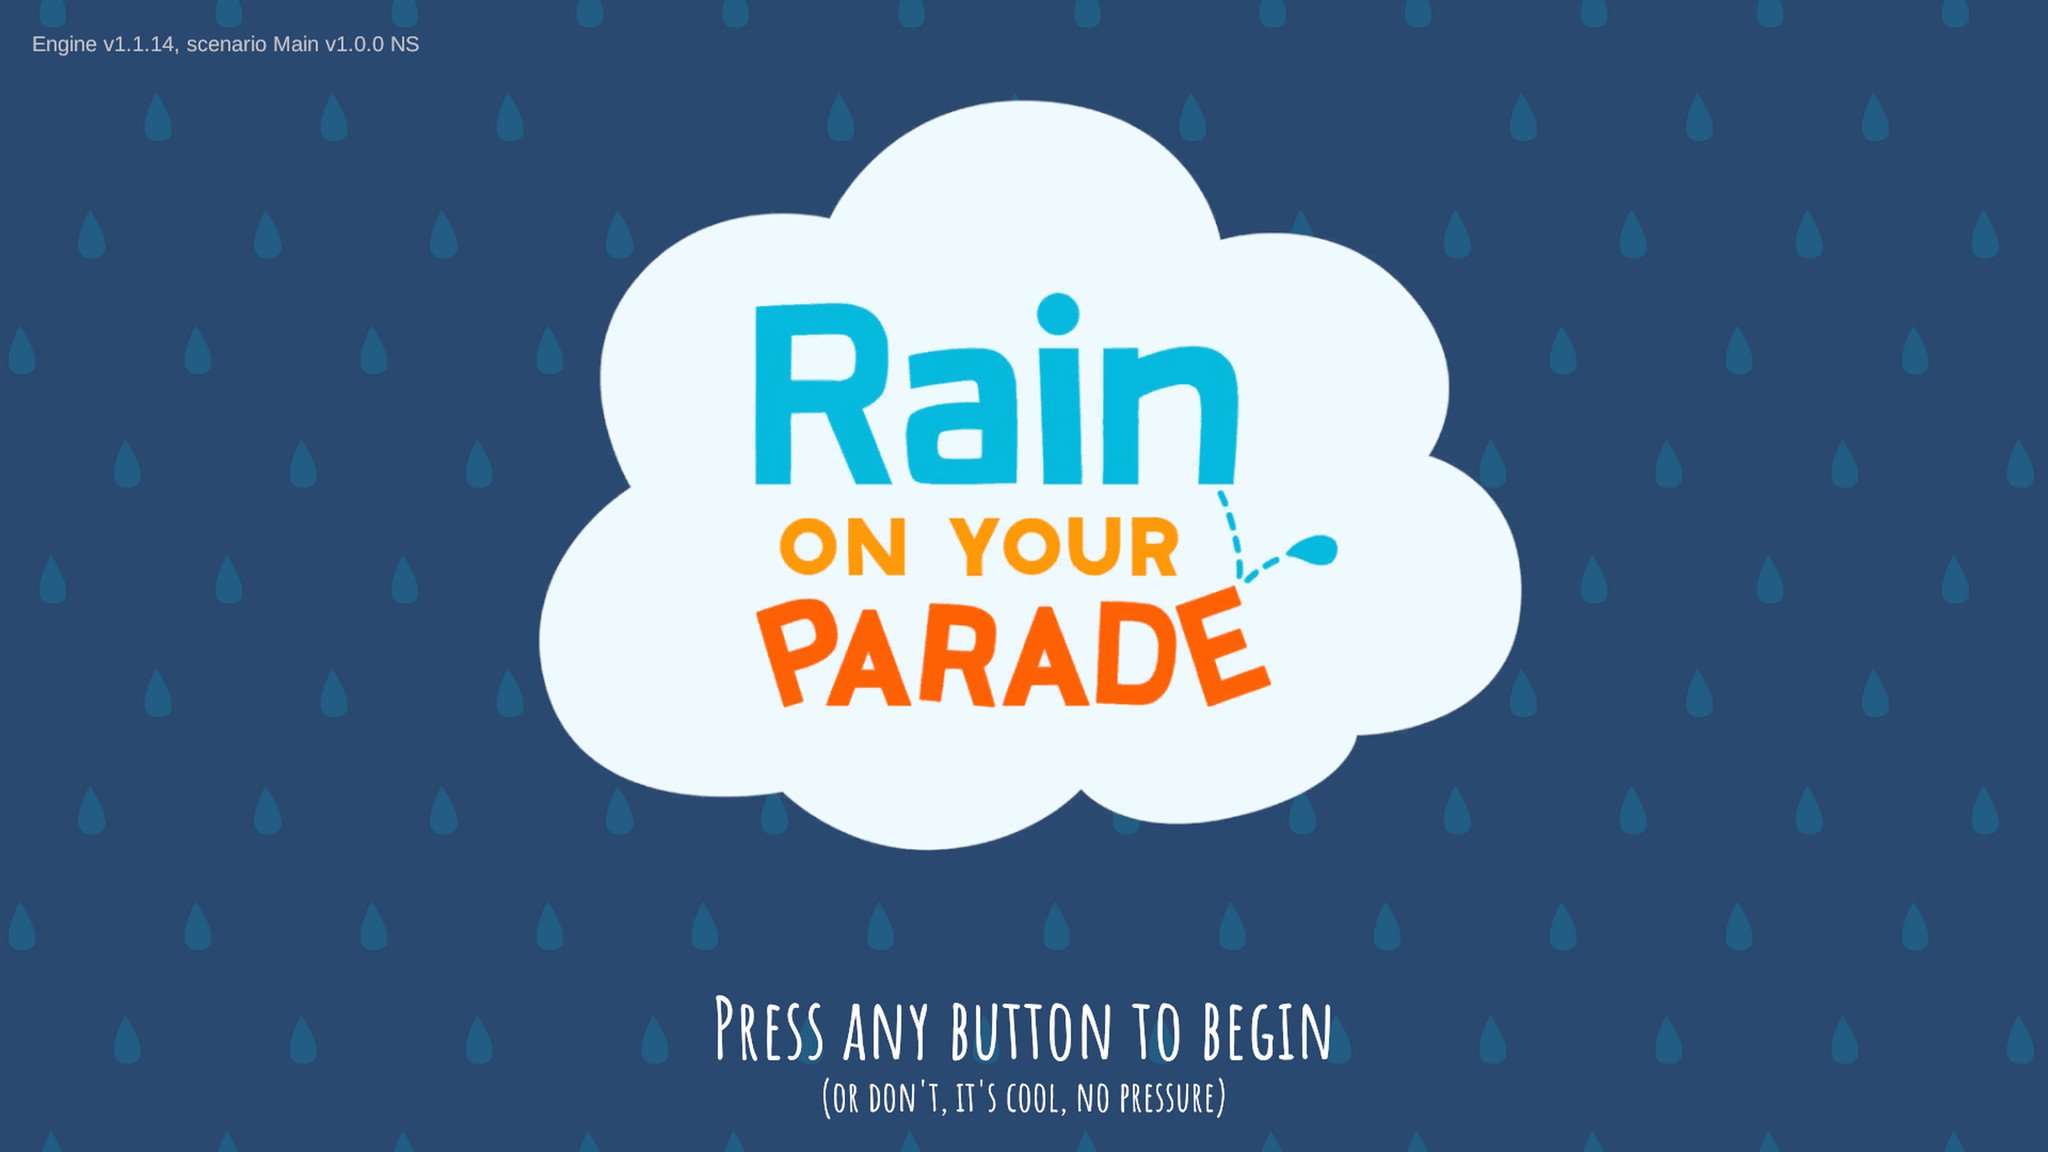 rain-on-your-parade-opening-screen.jpg